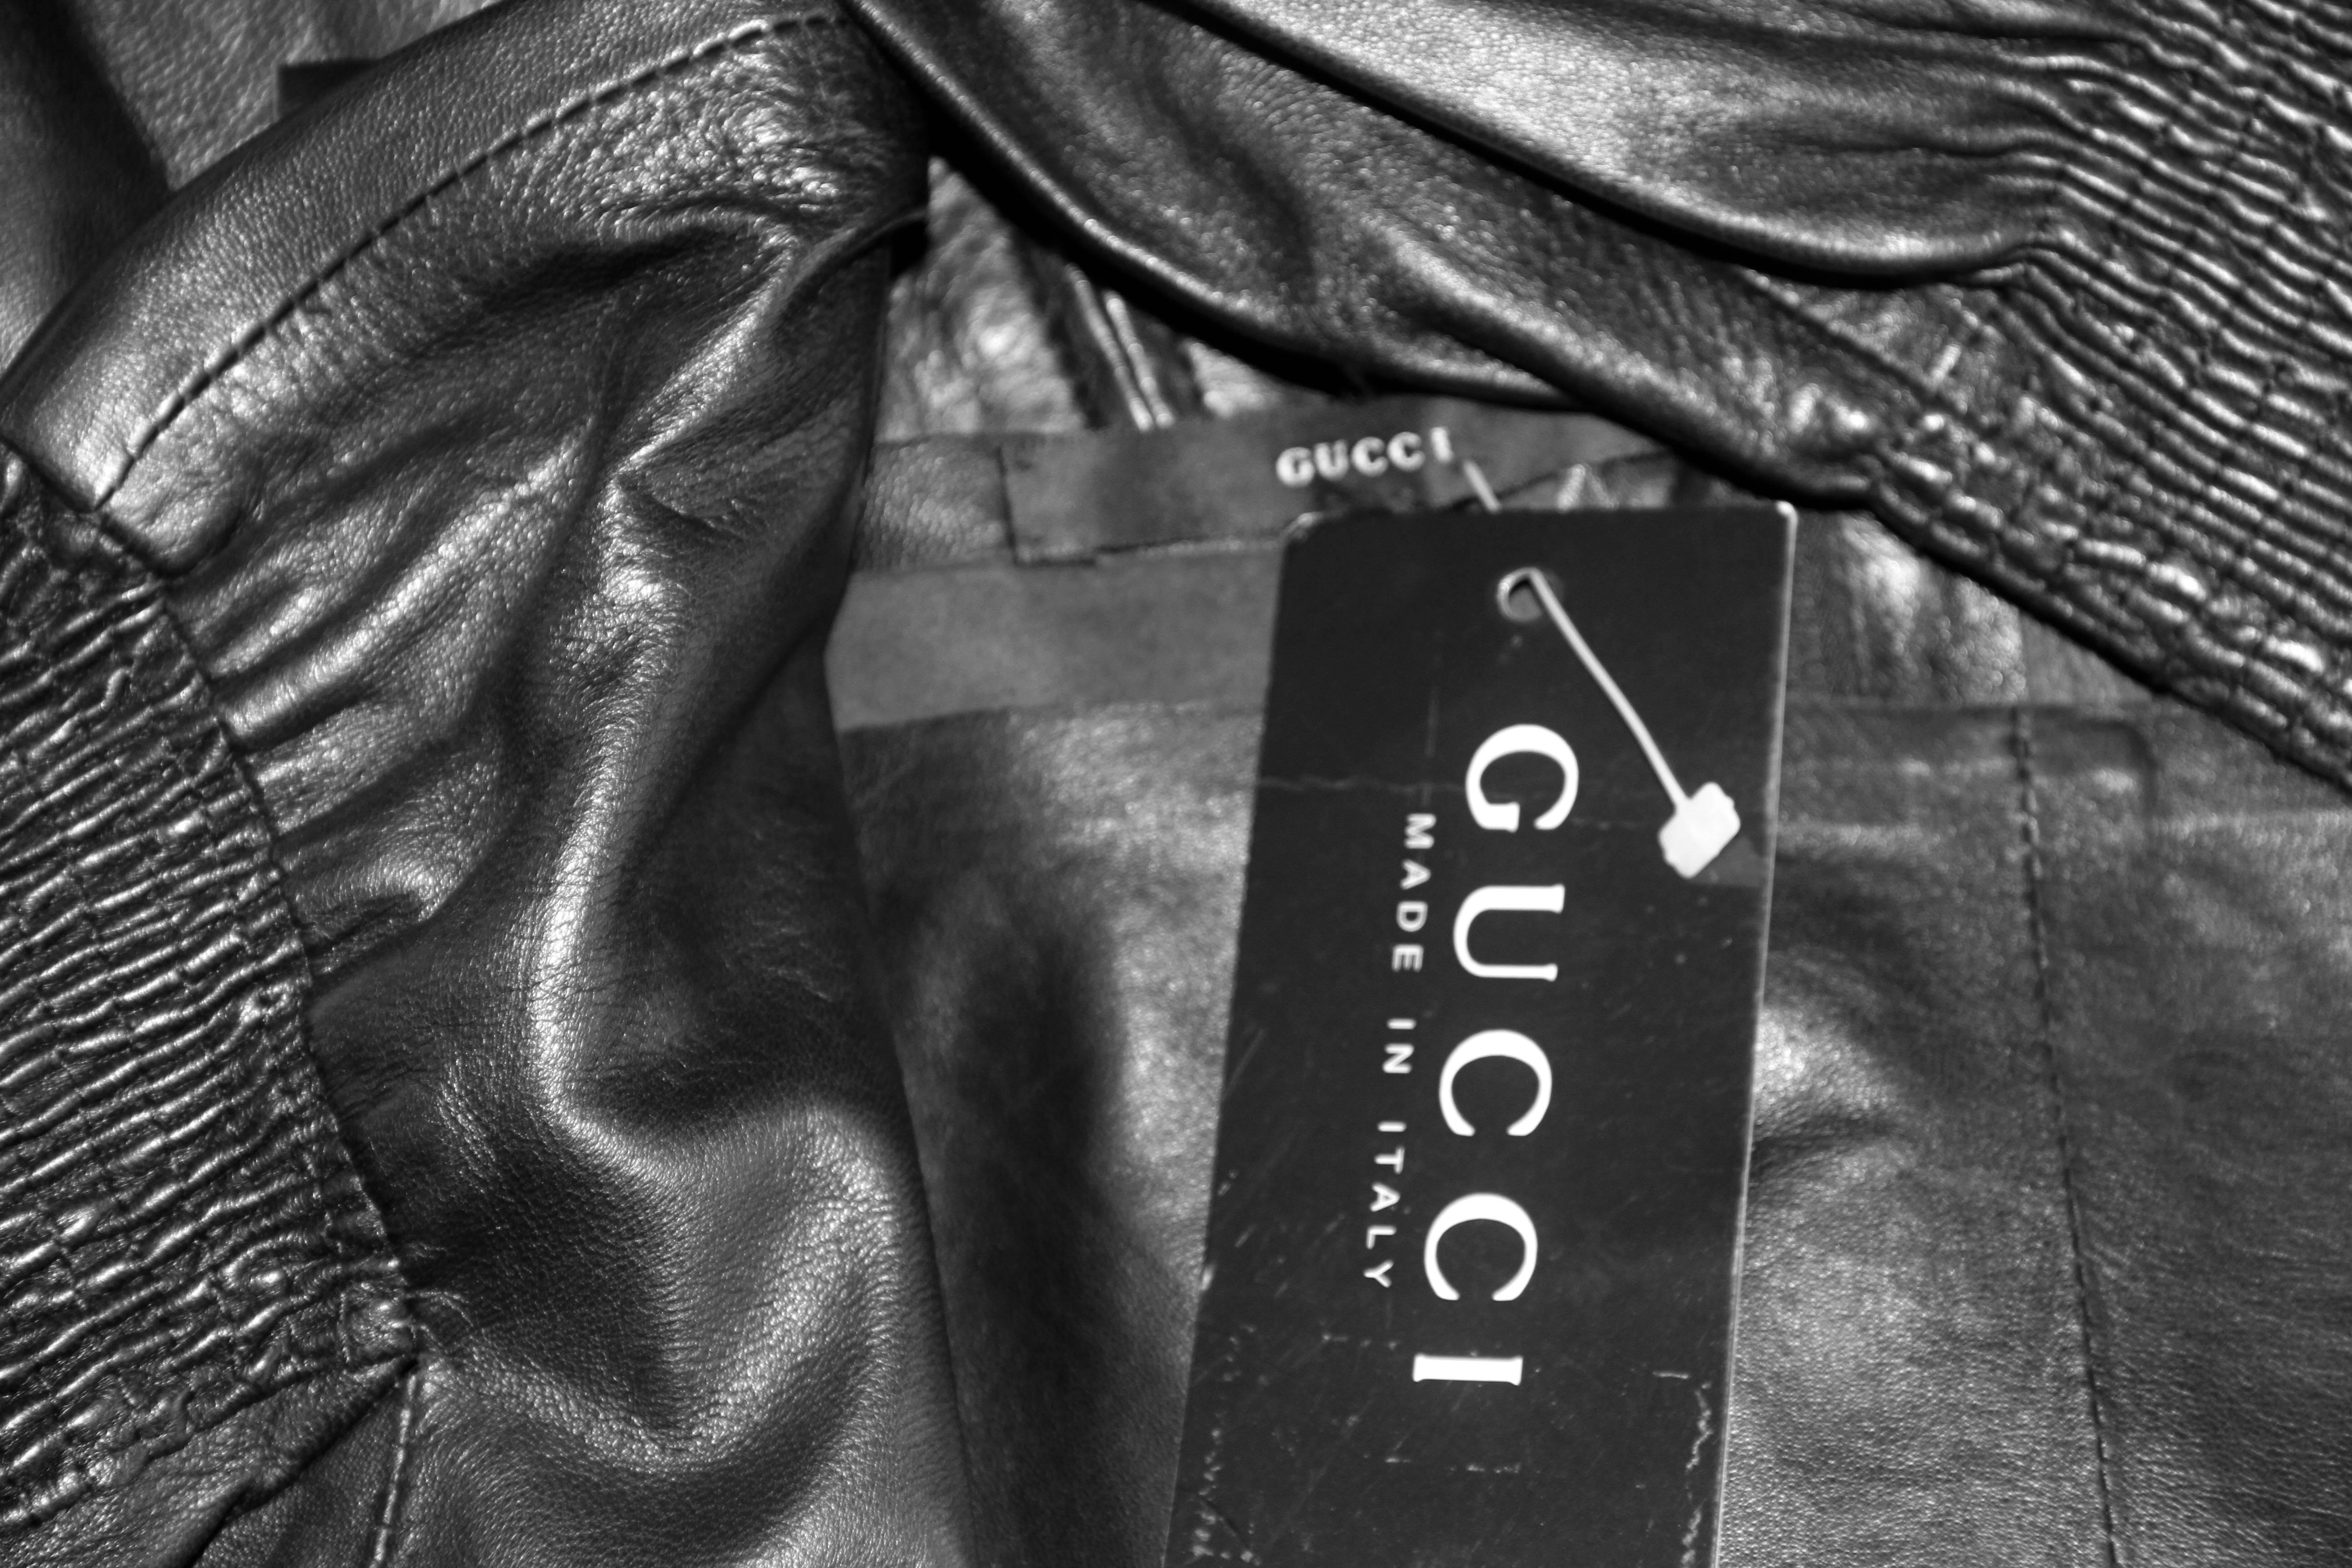 Iconic Tom Ford For Gucci black leather tunic from the Fall 1999 collection.

The tunic is new with the original tags.

Marked an Italian size 42.

Manufacturer - Zamasport S.p.a.